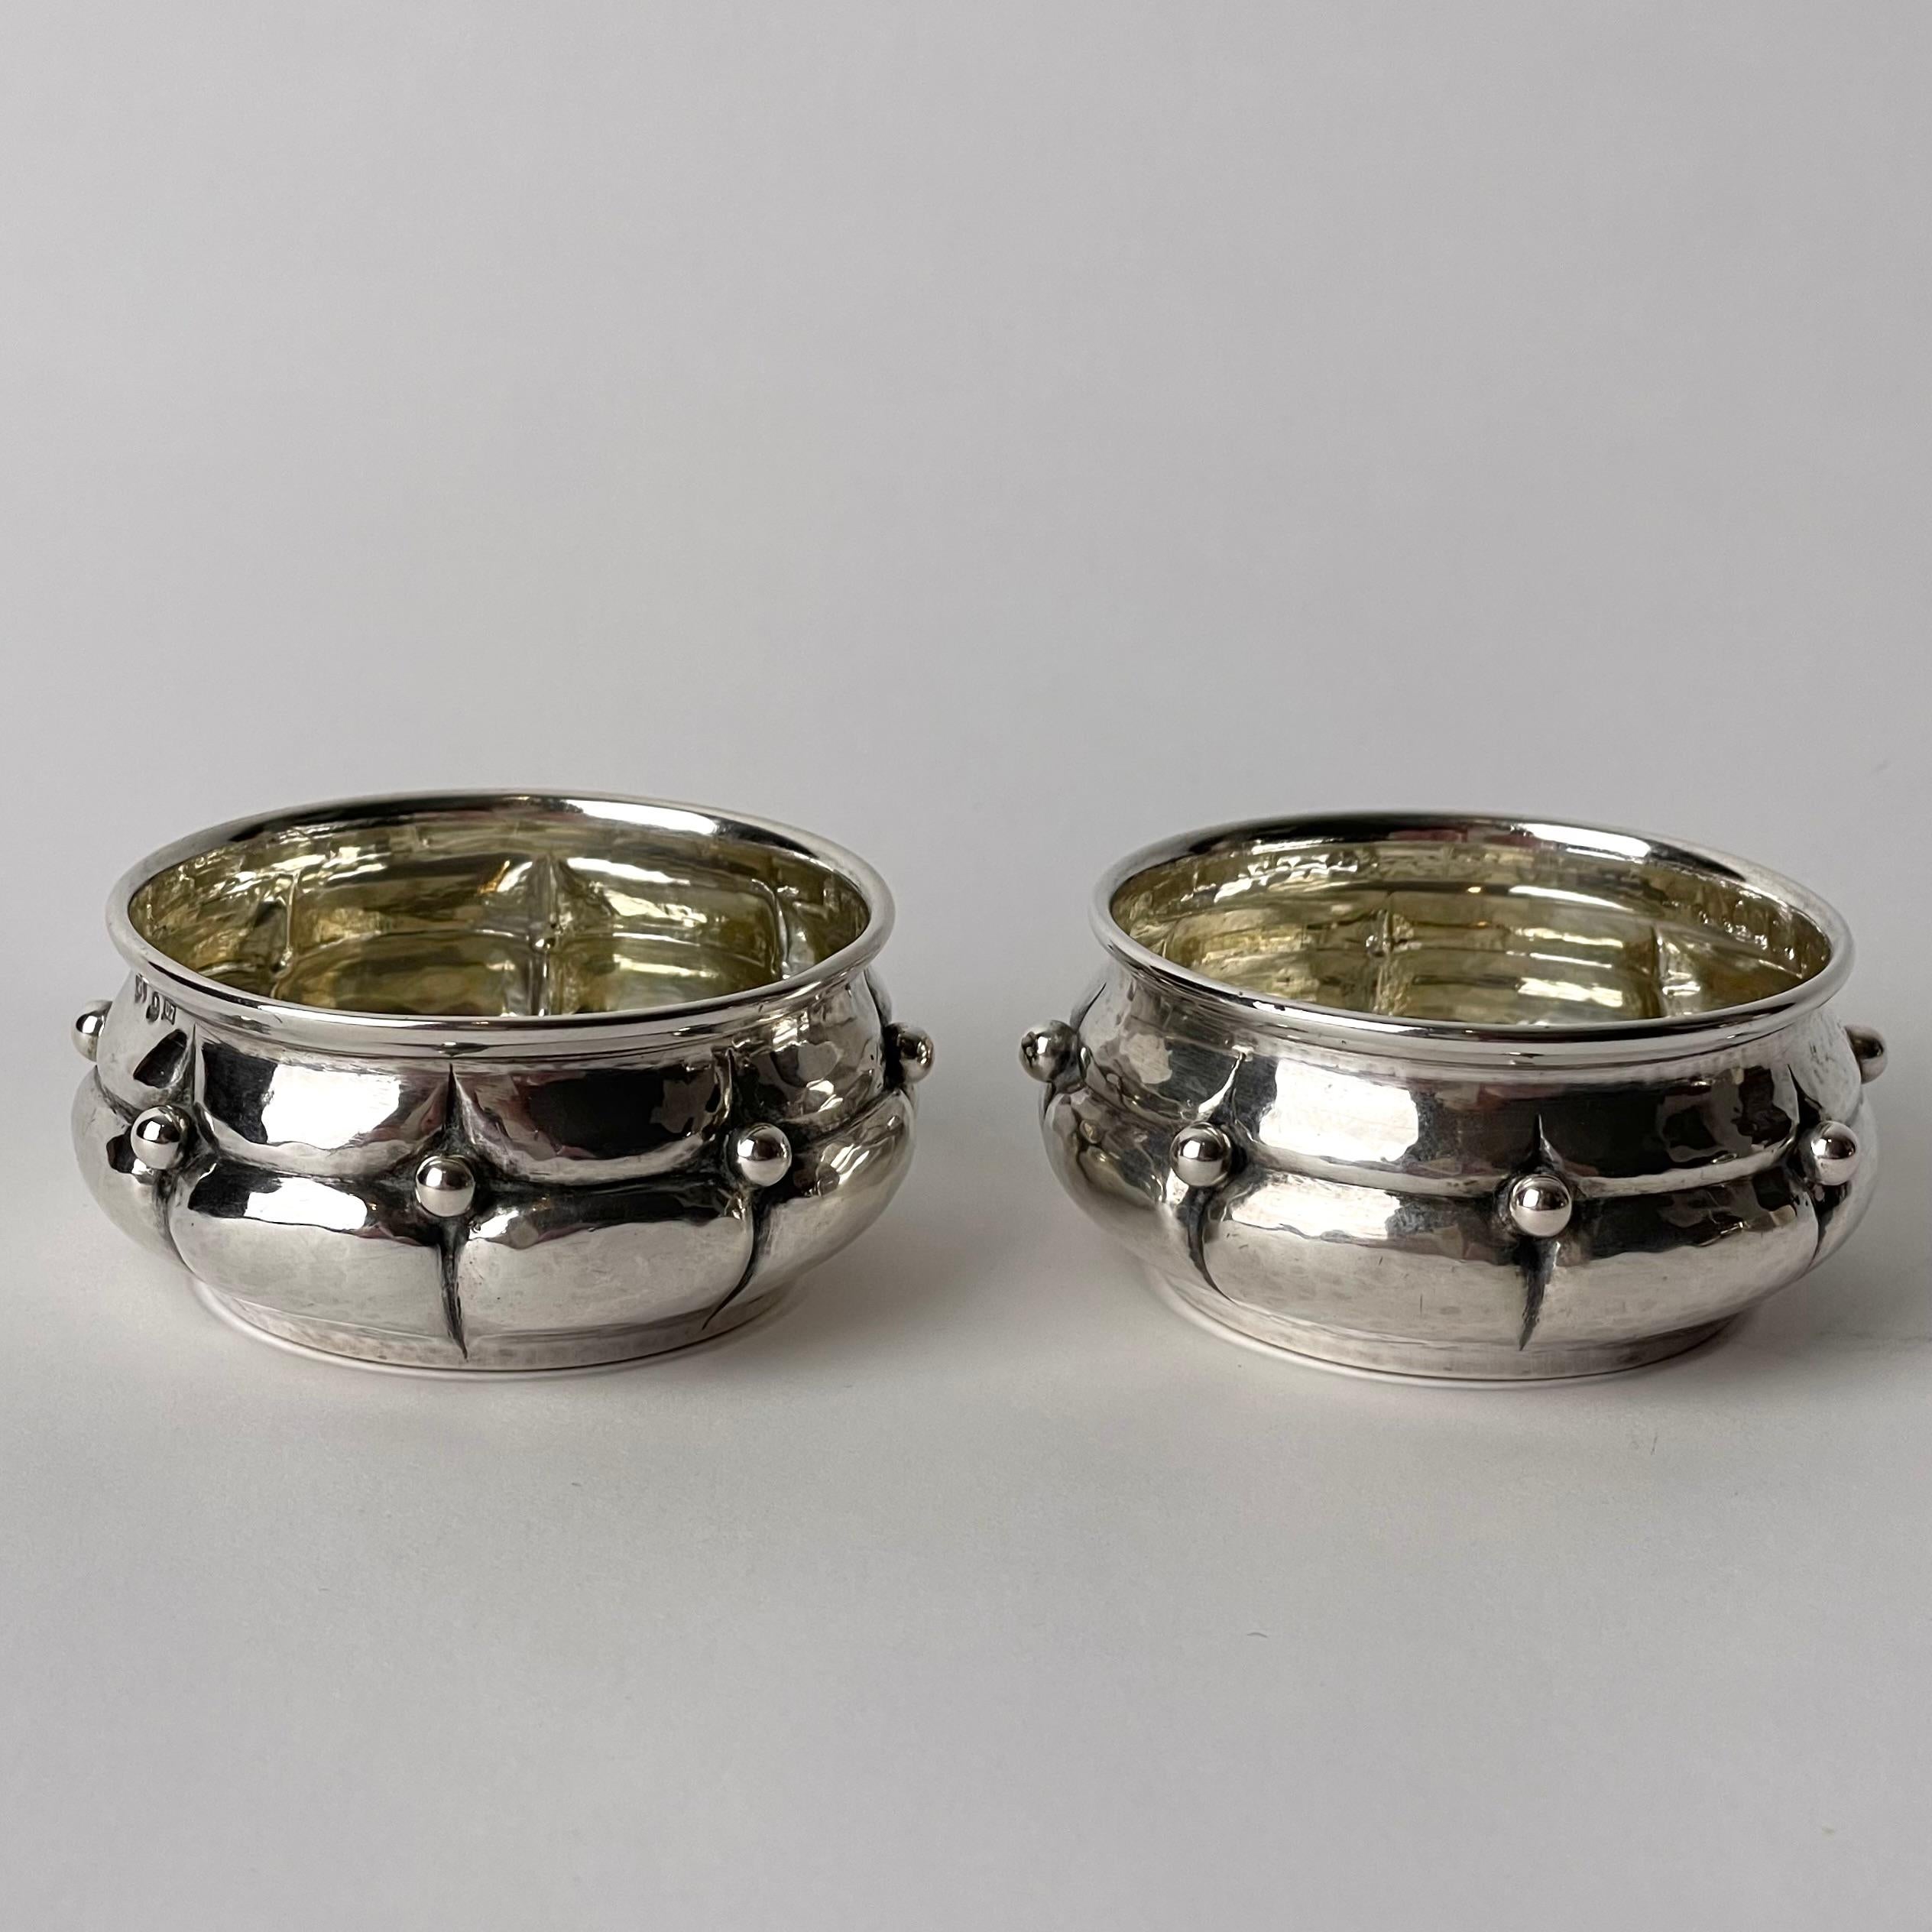 Beautiful pair of  Swedish Salt Cellars in Silver. Made in hammered silver with ball decorations. Control stamped in Sweden with U7 = 1922. Perfect for serving salt and pepper.

Wear consistent with age and use 